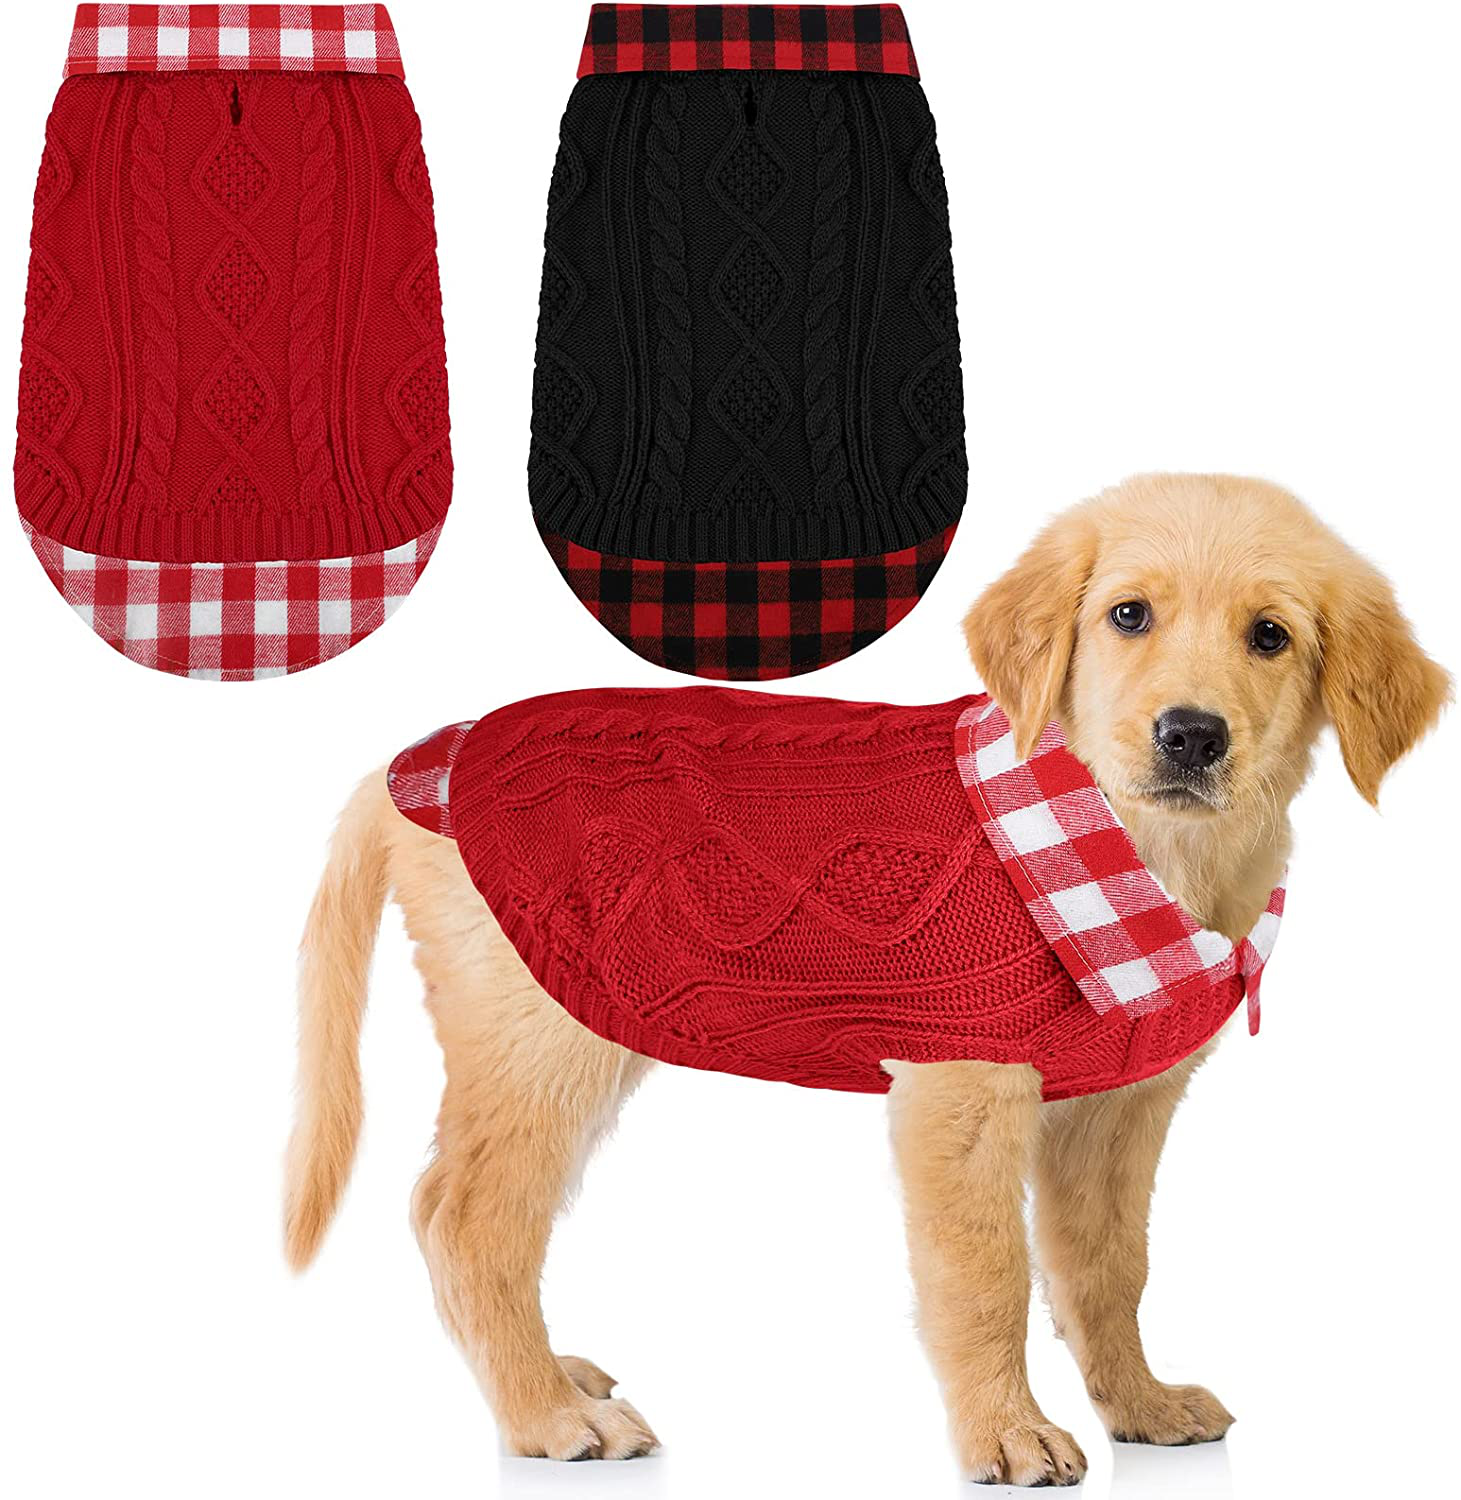 Pedgot Pack of 2 Turtleneck Knitted Dog Sweater Soft and Warm Pet Winter Clothes Classic Cable Knit Plaid Patchwork Pet Sweater for Small Medium Large Dogs Animals & Pet Supplies > Pet Supplies > Dog Supplies > Dog Apparel Pedgot Red, Black Large 